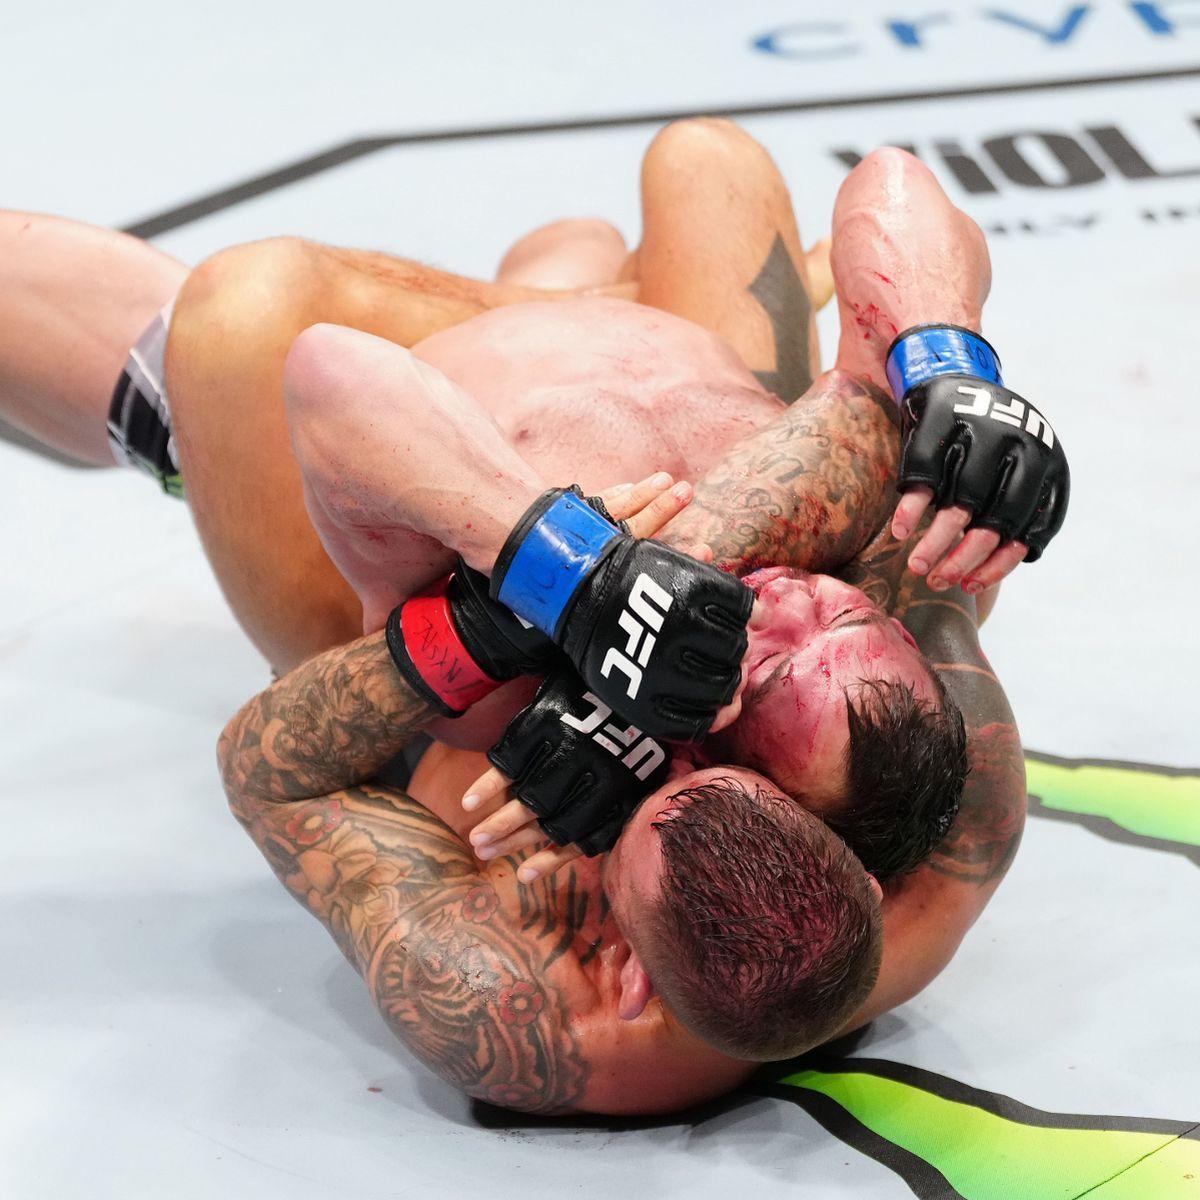 Dustin Poirier takes Michael Chandler's back during his submission win. Credits to: Zuffa LLC.